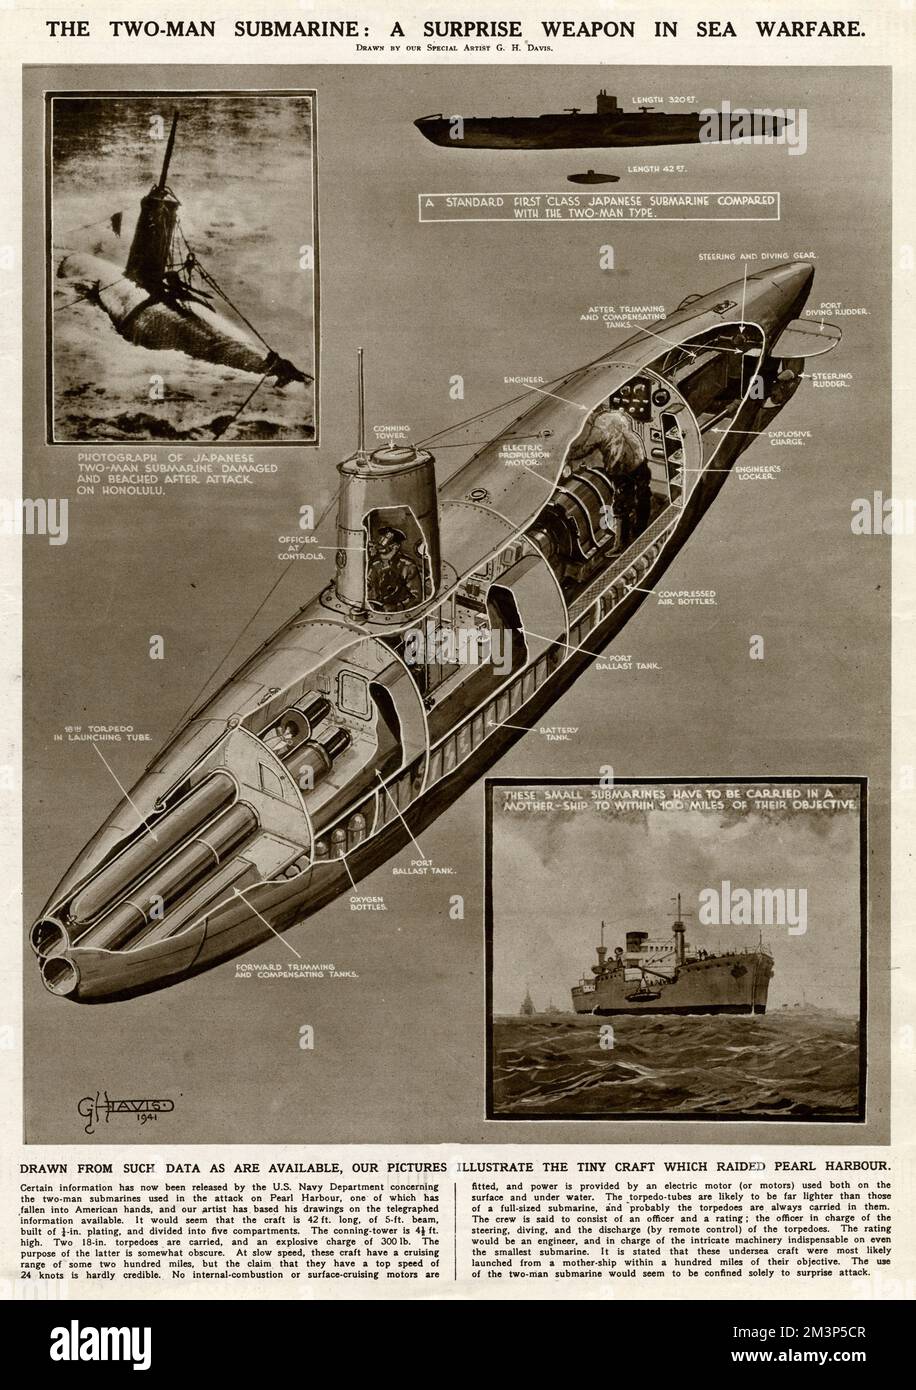 The Japanese two-man submarine: a surprise weapon in sea warfare during the Second World War.  An illustration of the tiny craft which raided Pearl Harbour, and a photograph (top left) of the vessel damaged and beached after the attack on Honolulu.       Date: 1941 Stock Photo